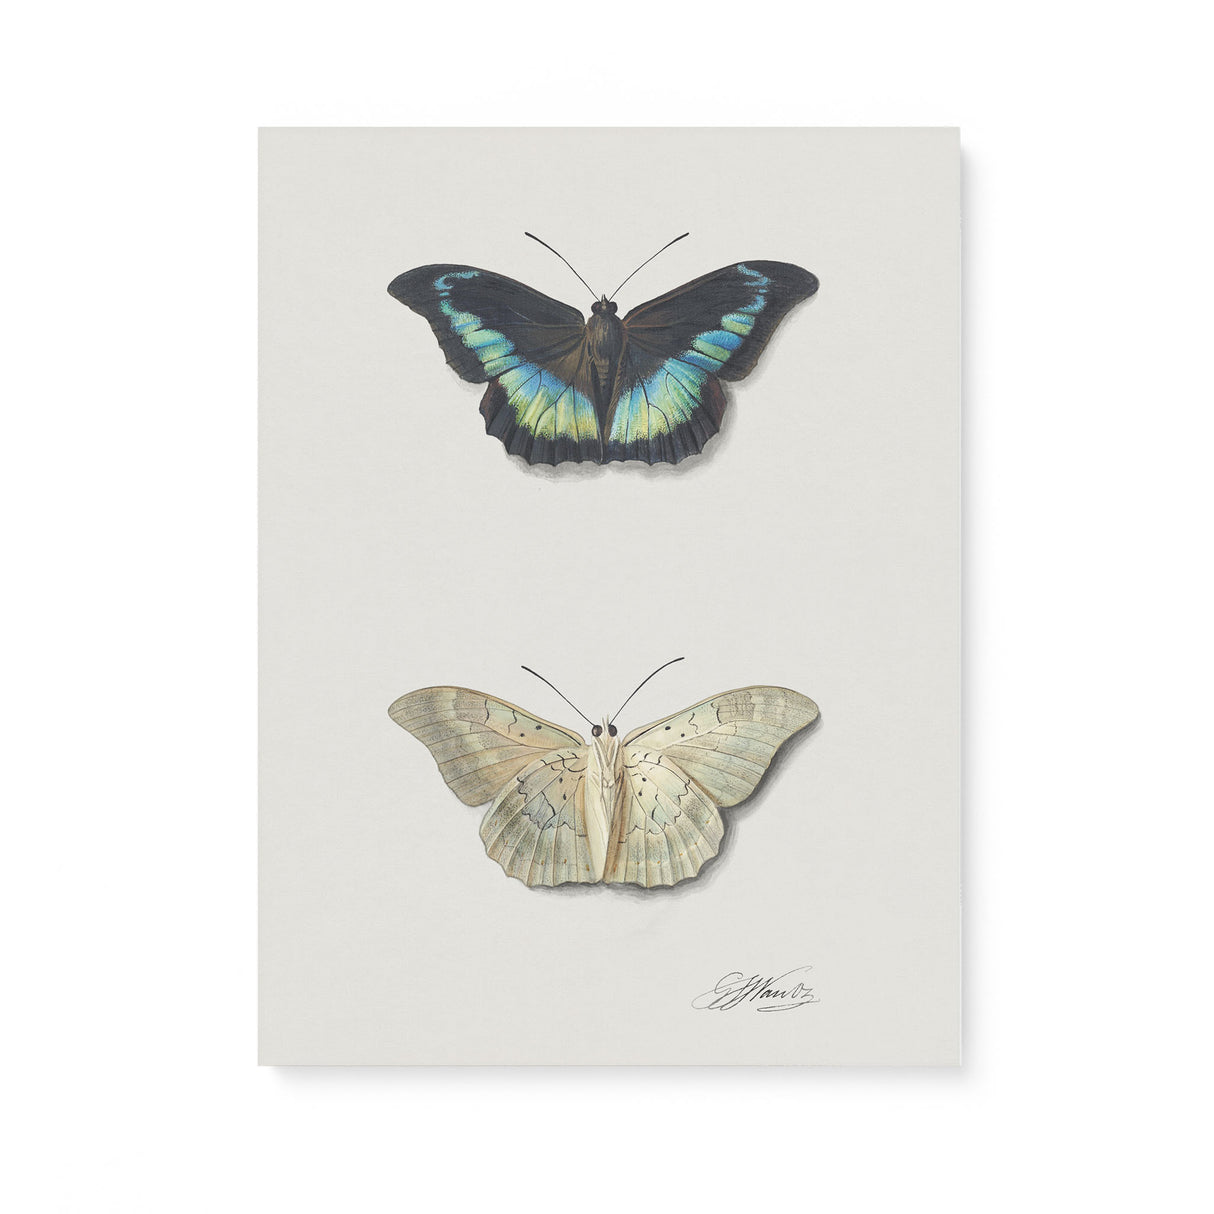 "Top and Bottom View of a Butterfly" Wall Art Canvas by Georgius Jacobus Johannes van Os Canvas Wall Art Sckribbles 18x24  